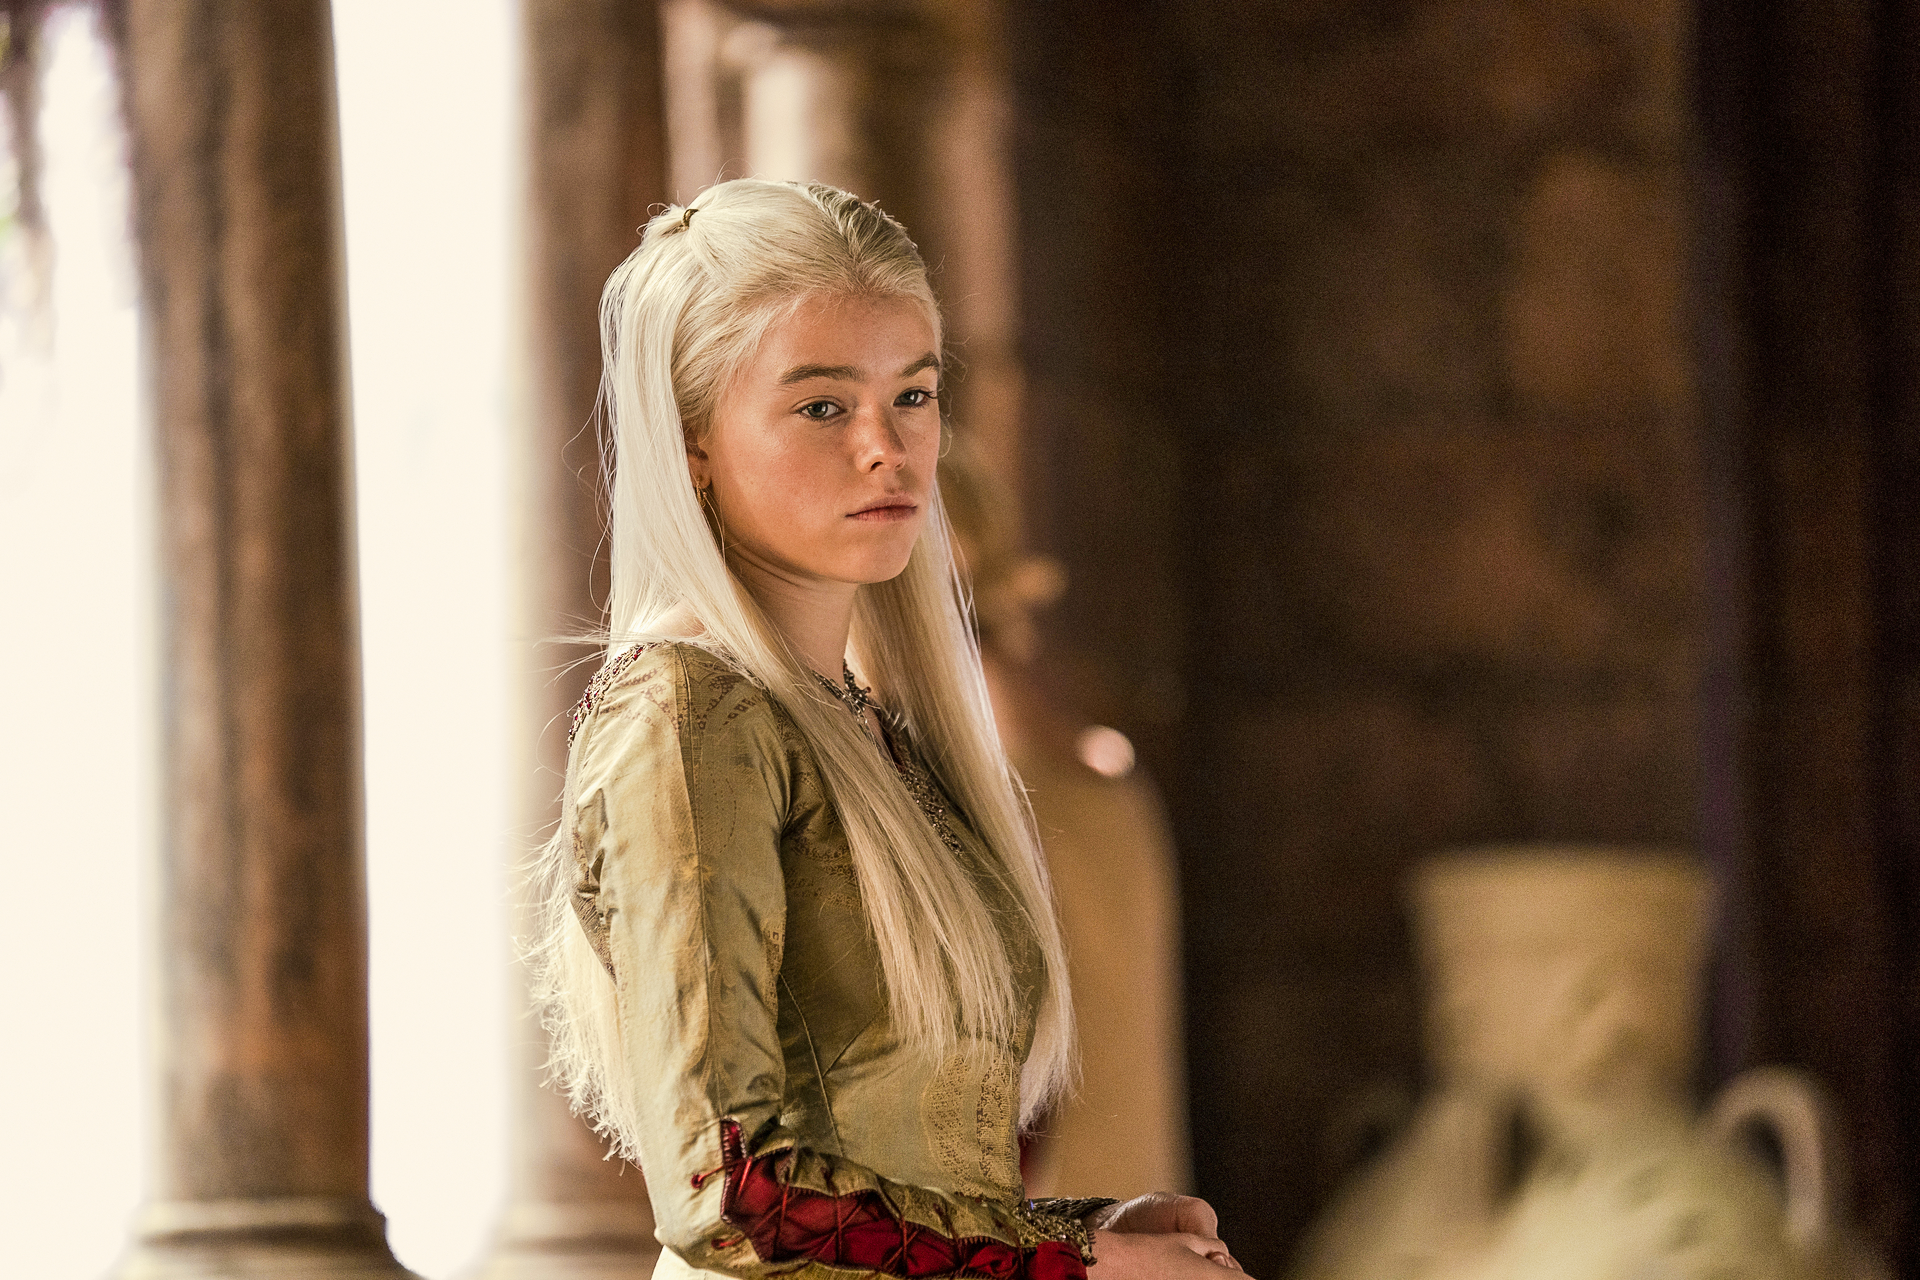 How Is Rhaenyra Related to Daenerys In House of the Dragon